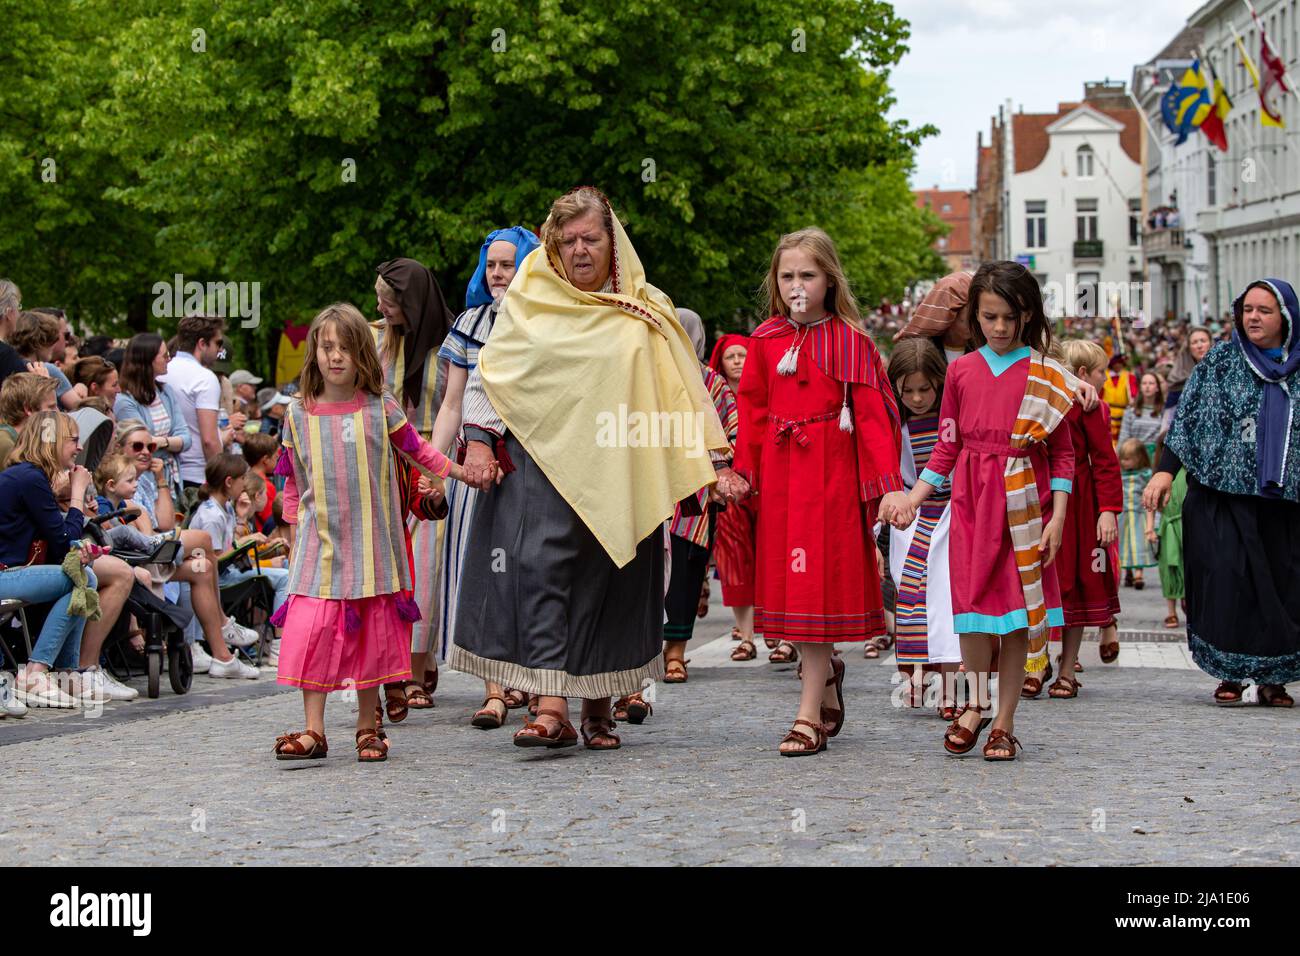 Illustration picture shows the Holy Blood Procession (Heilige Bloedprocessie - Procession Saint-Sang) event, on Thursday 26 May 2022 in Brugge. During Stock Photo